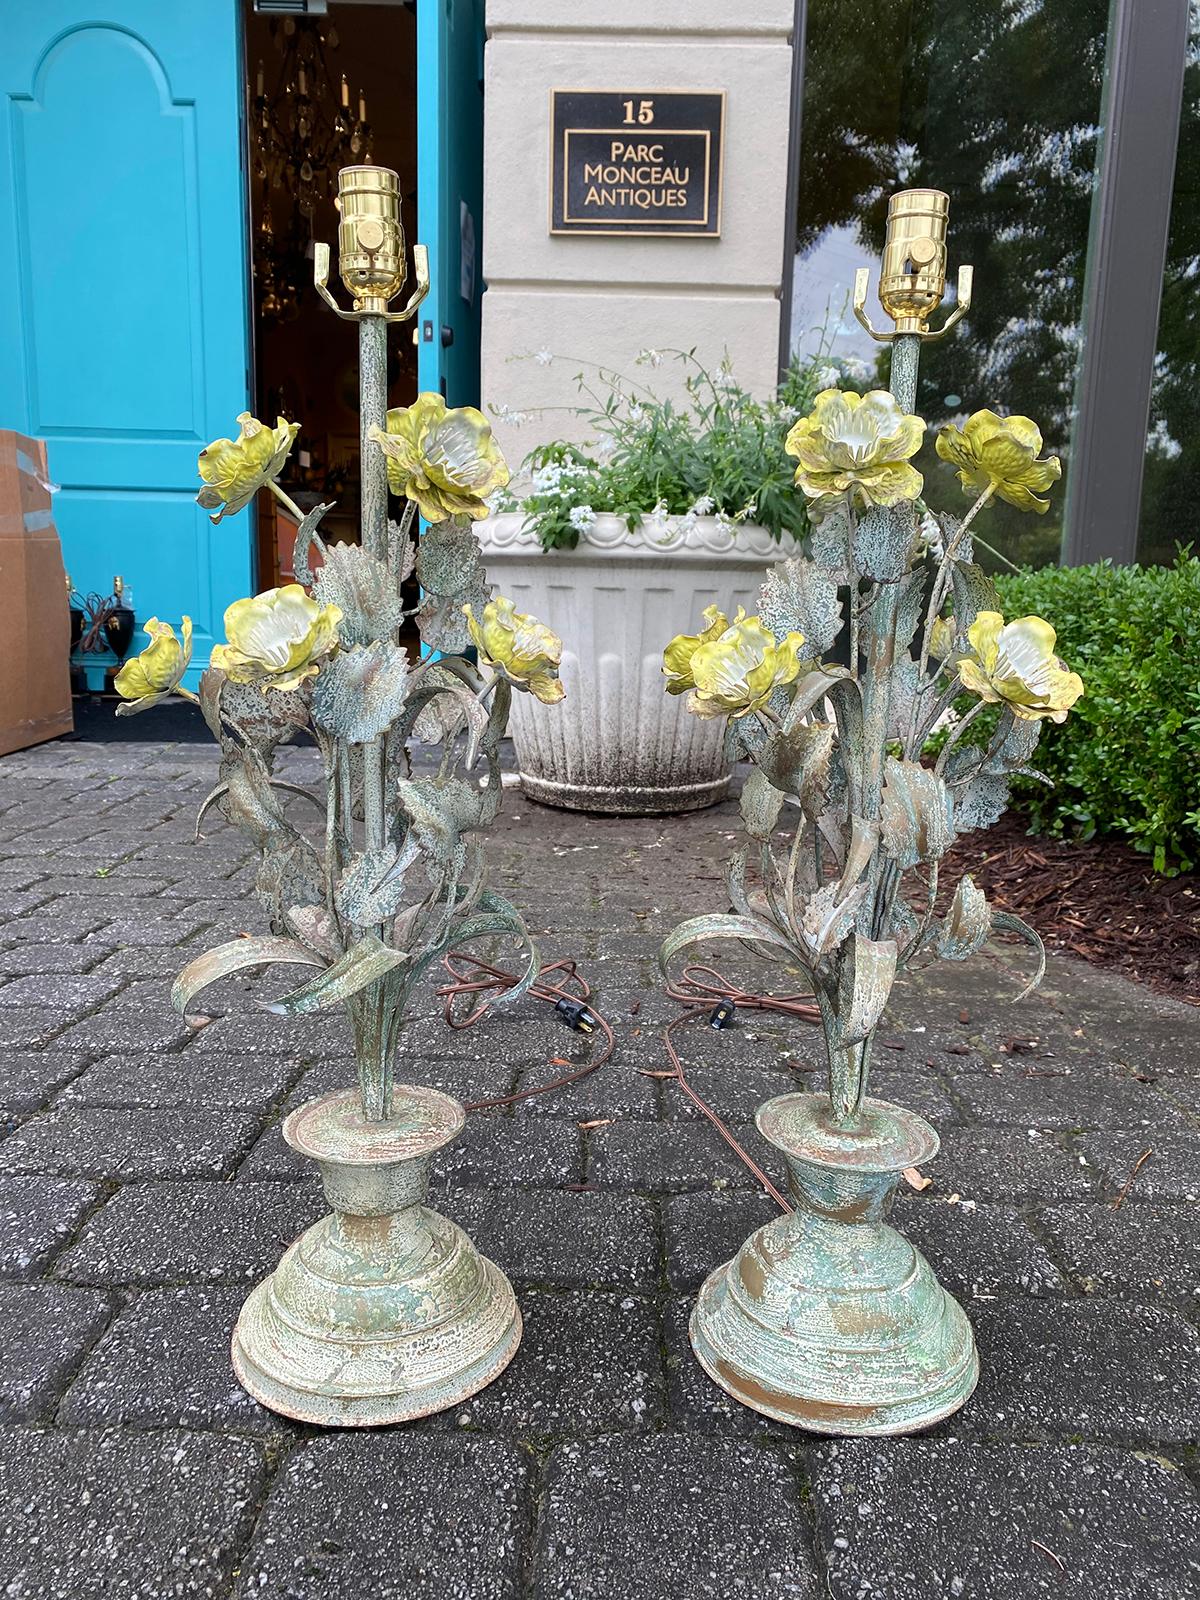 Pair of mid-20th century green tole lamps with yellow flowers
New wiring
Has yellow flower finials, too.
Base measures 7